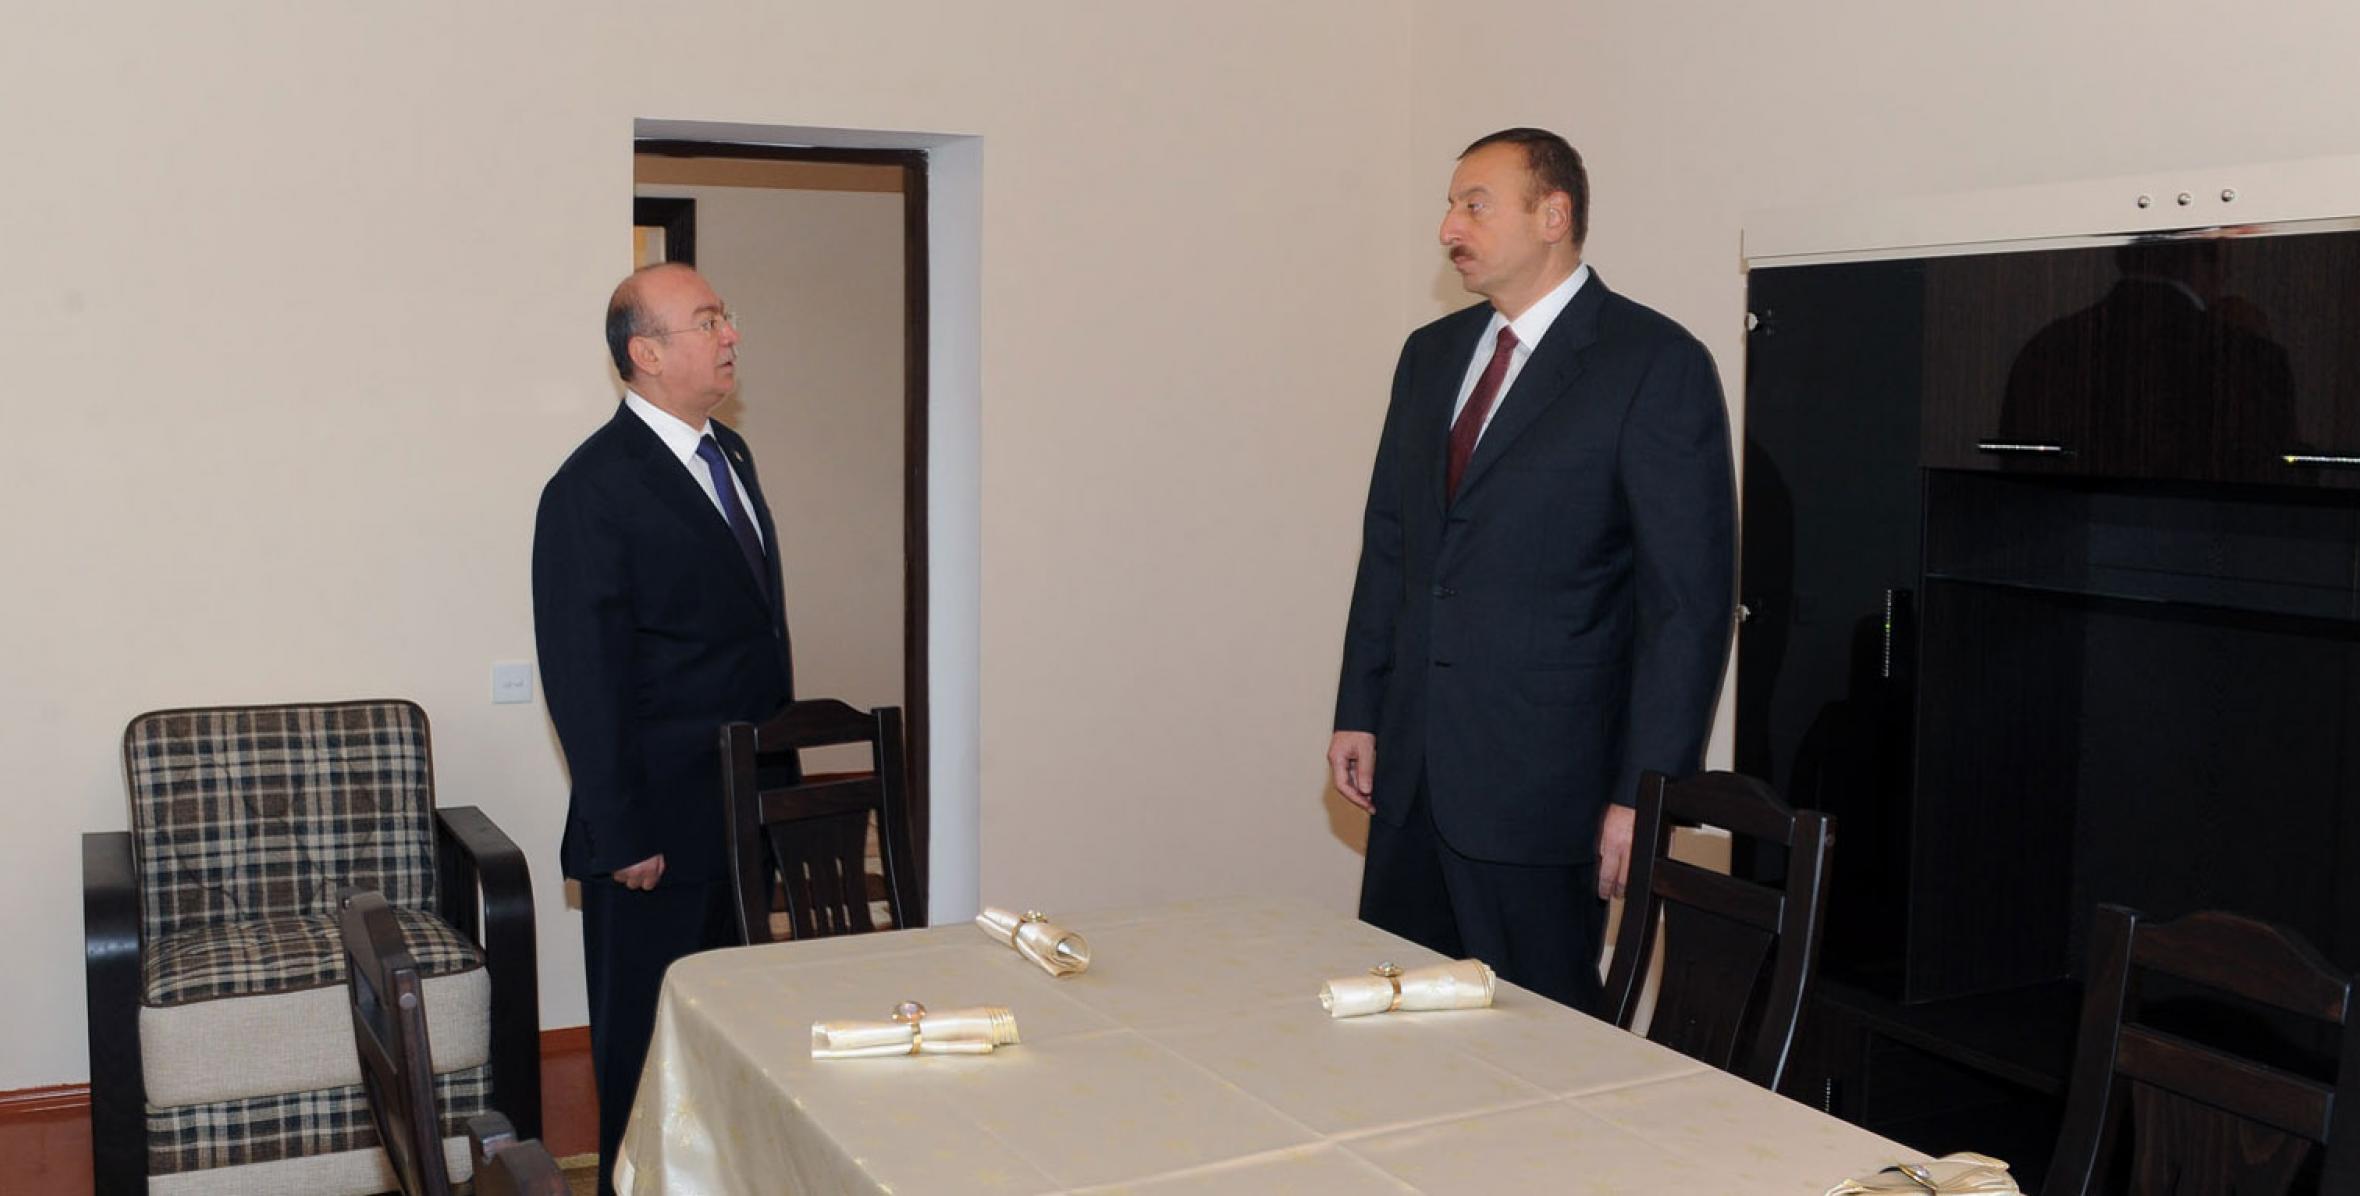 Ilham Aliyev participated in the opening of a new settlement built for citizens whose houses were destroyed in Salyan region